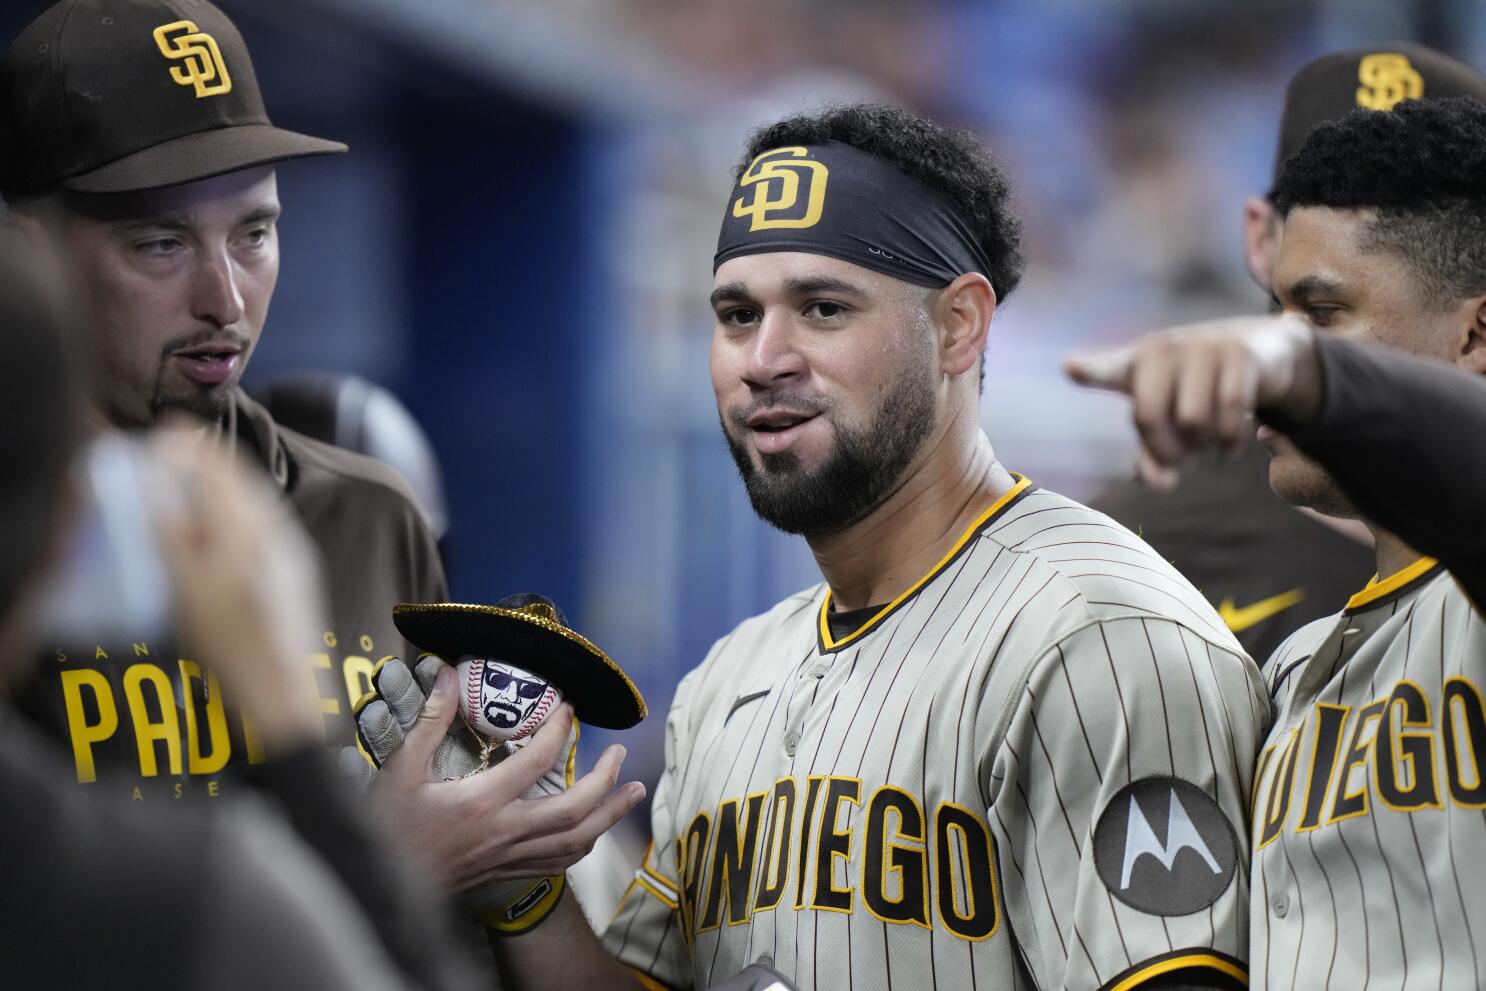 Padres make moves, with more likely to come - The San Diego Union-Tribune